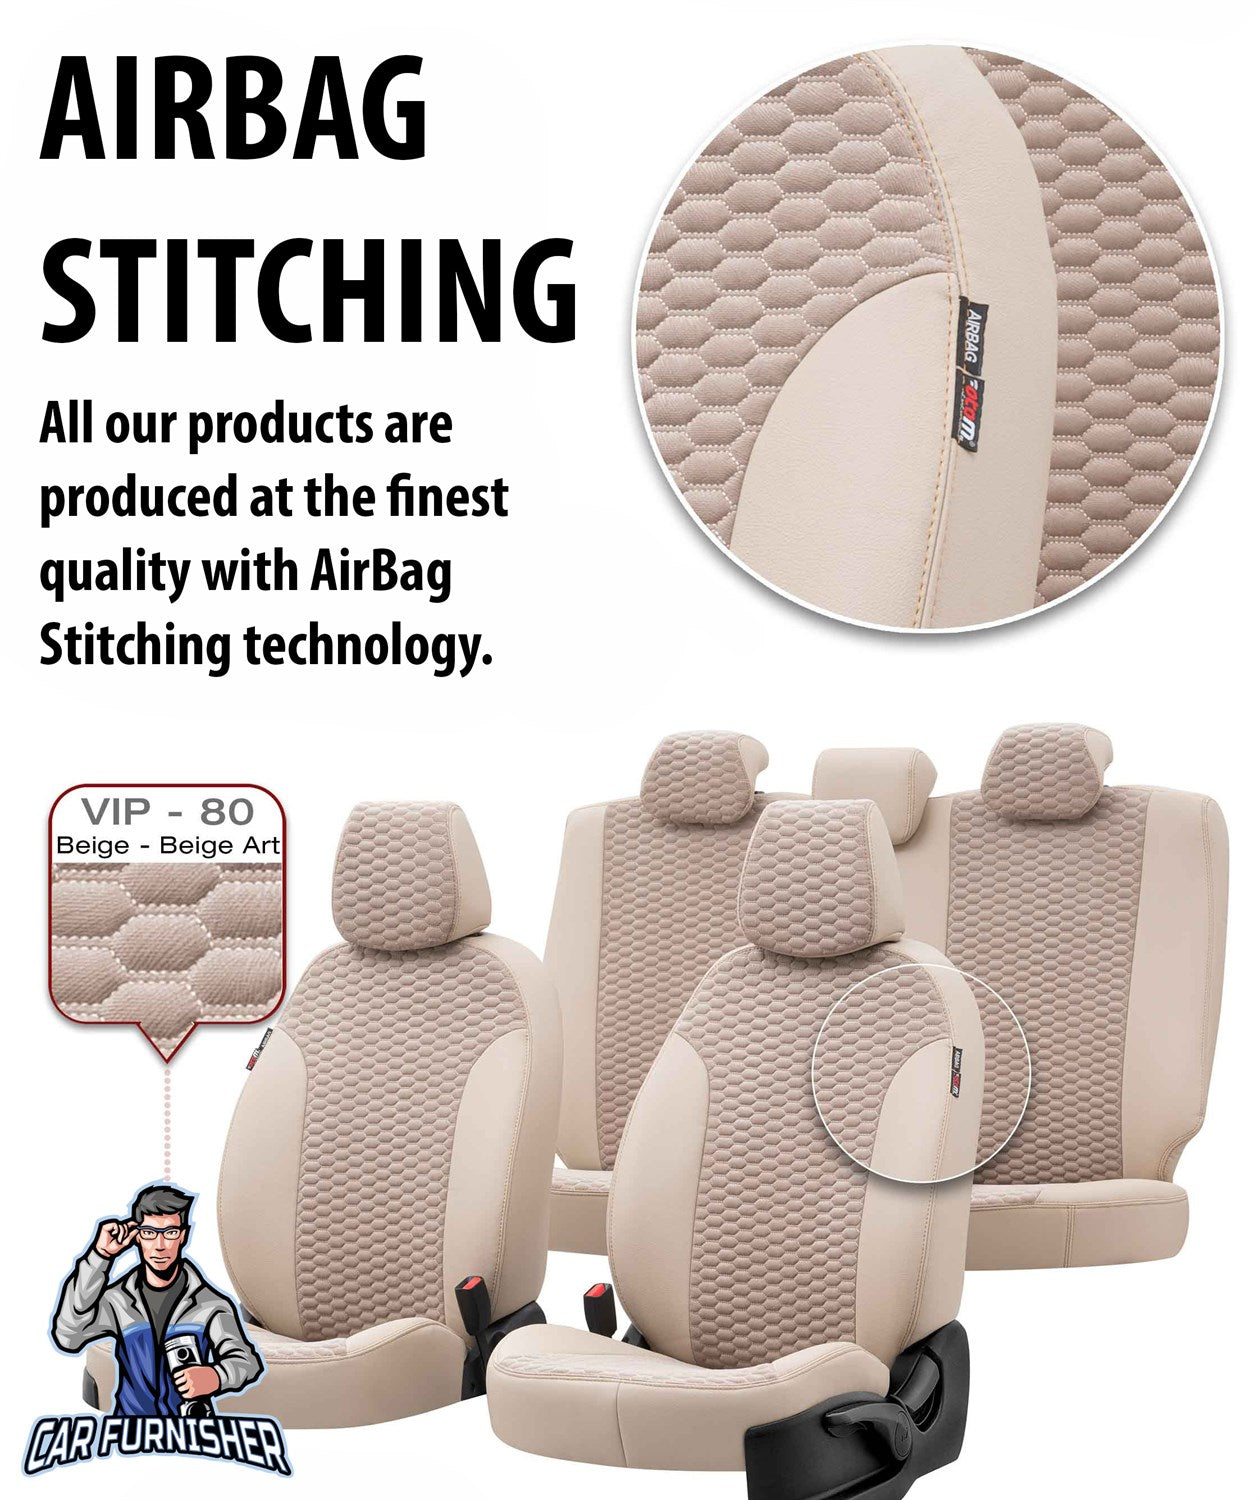 Volkswagen Touran Seat Cover Tokyo Foal Feather Design Smoked Leather & Foal Feather